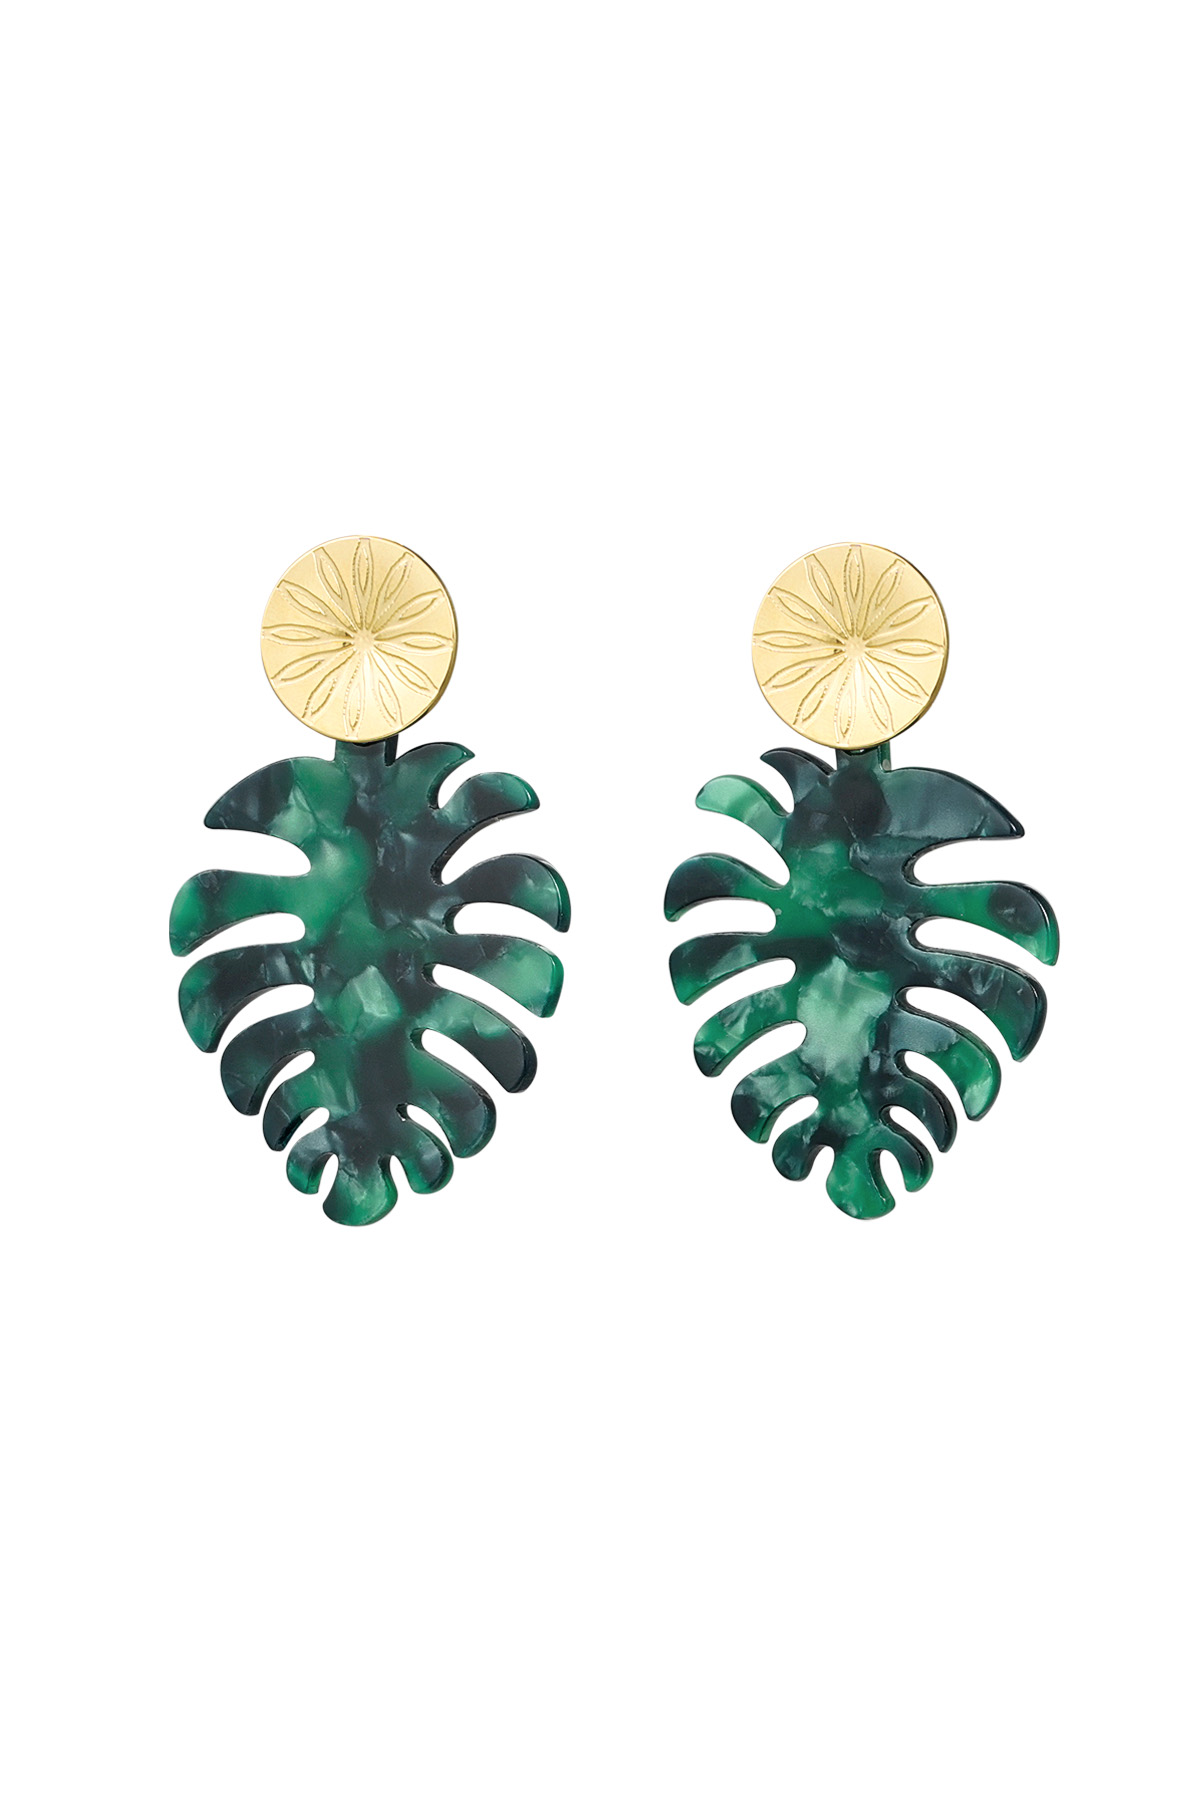 Earrings leaves with print - gold/green h5 